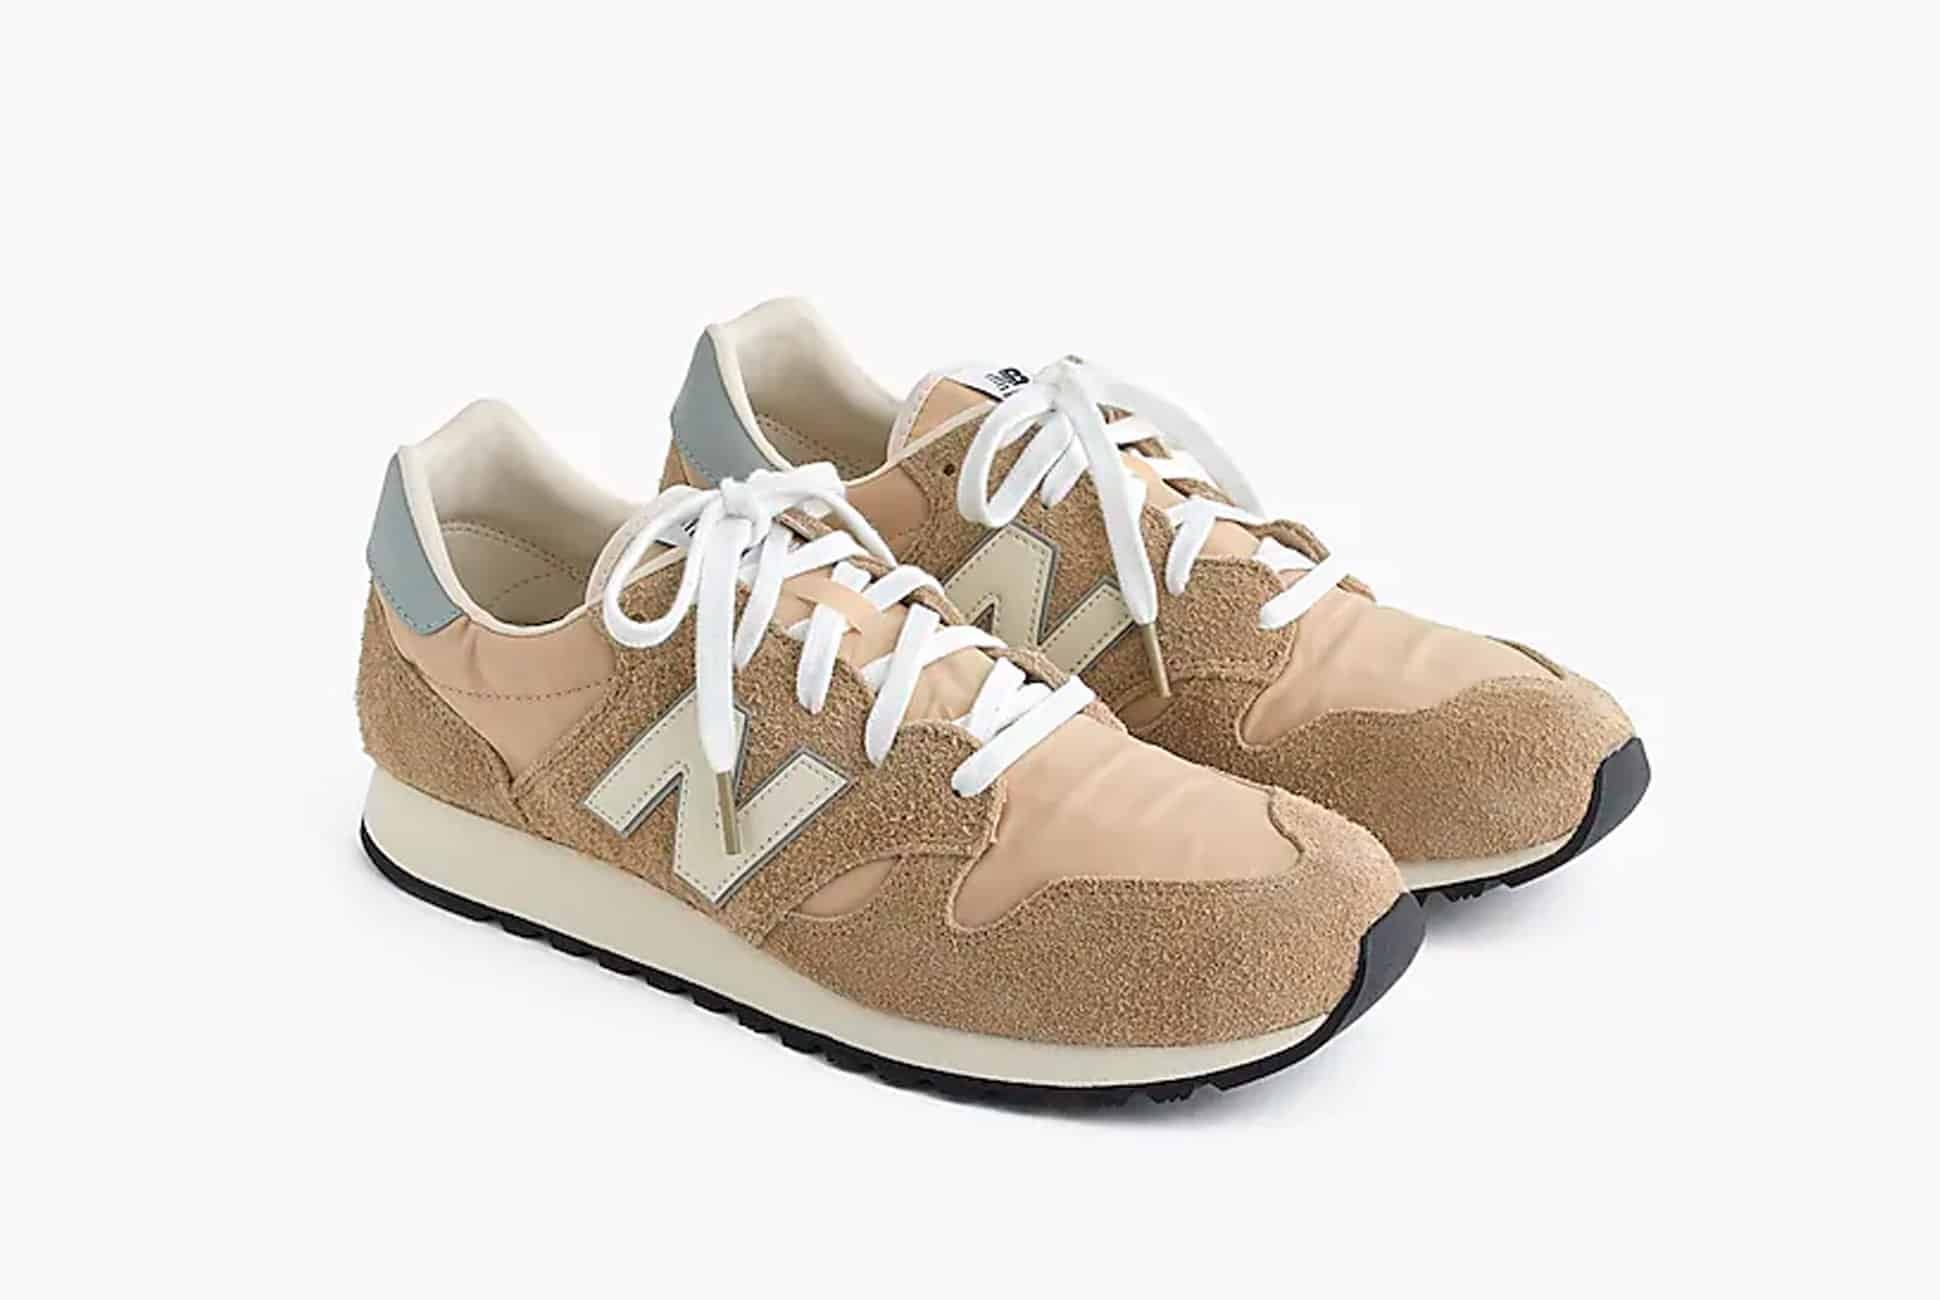 These Retro New Balance Sneakers Are 